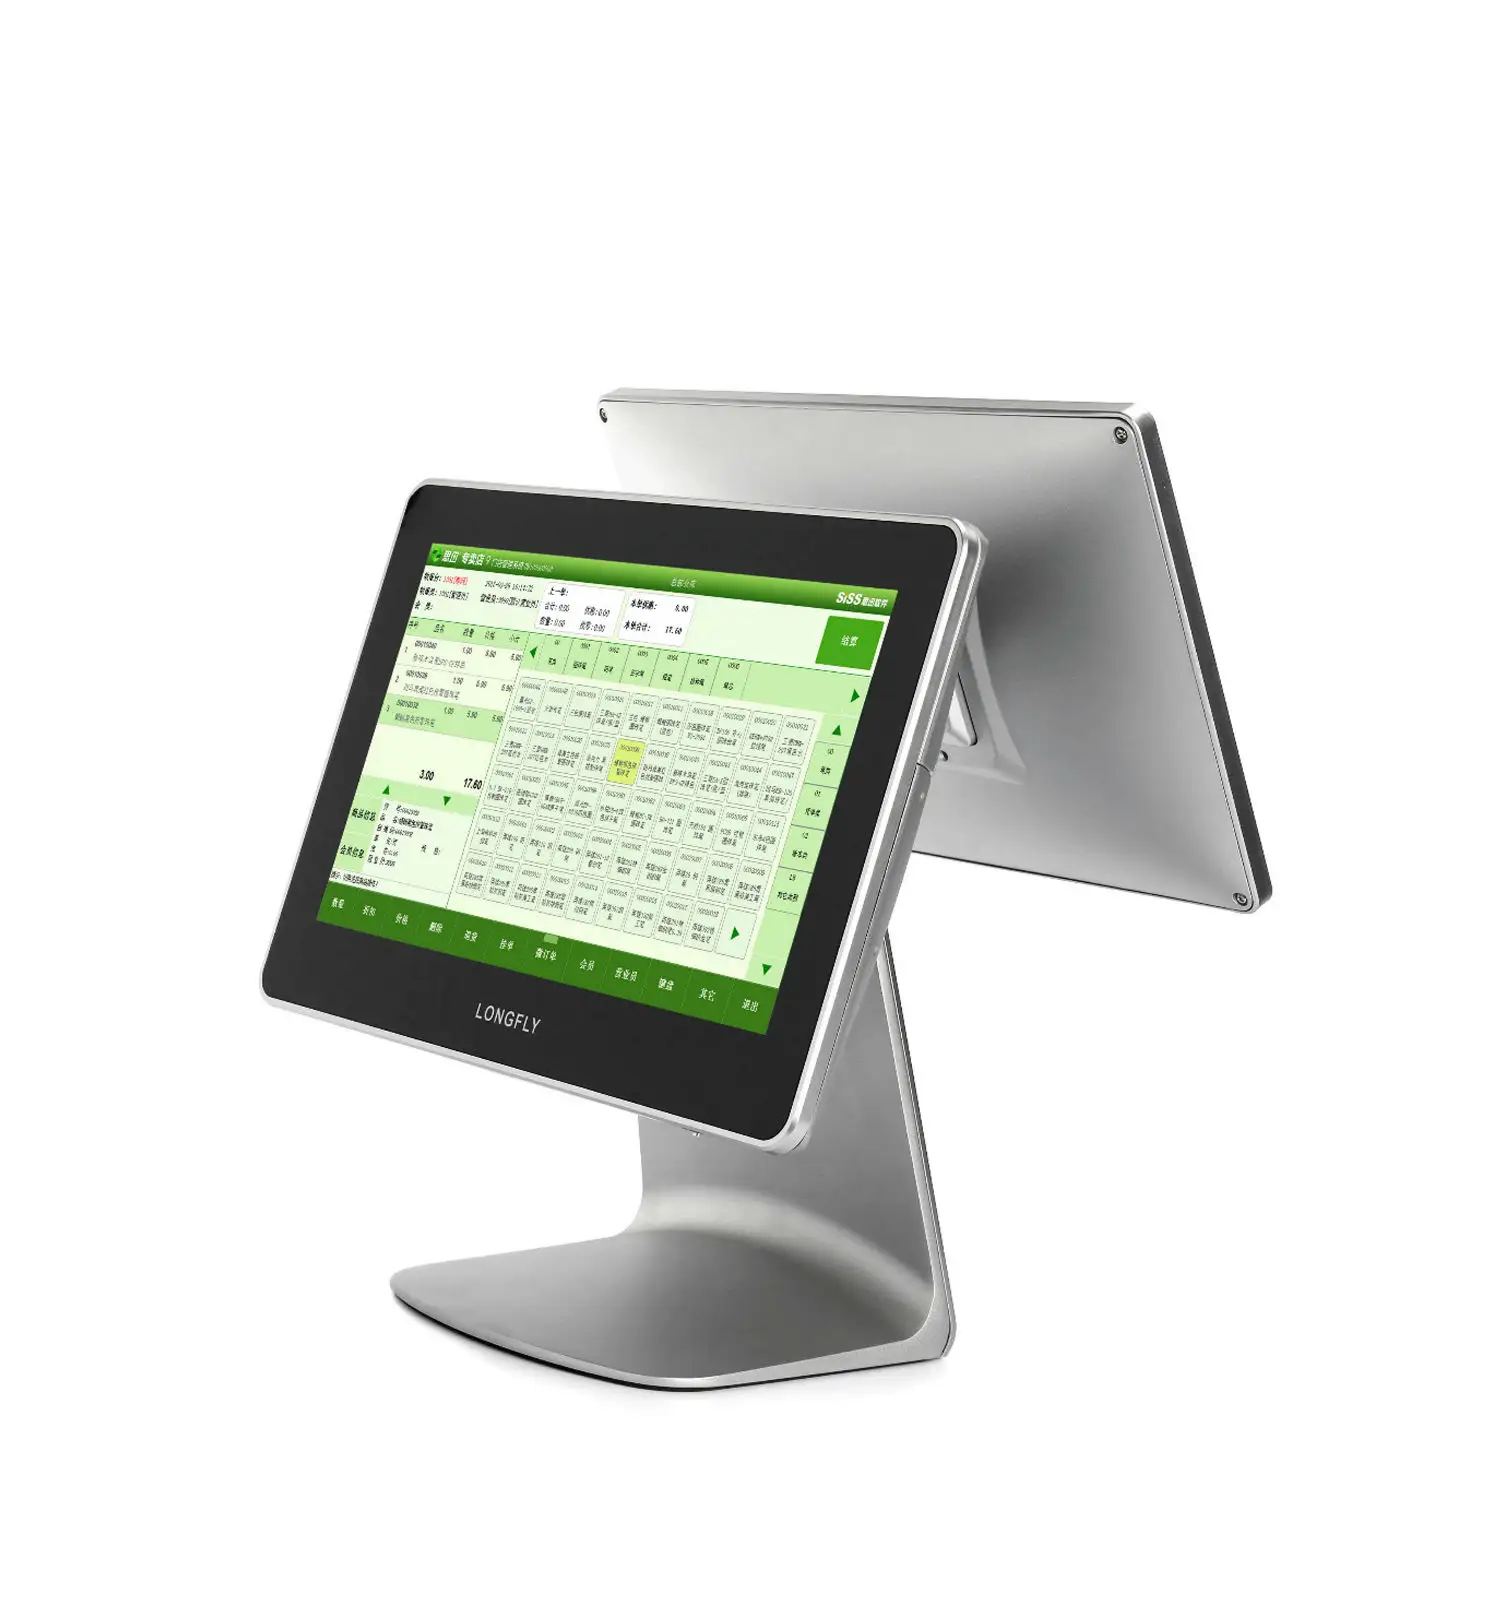 14" touch screen Android POS /Windows 7 10 POS system with Wifi